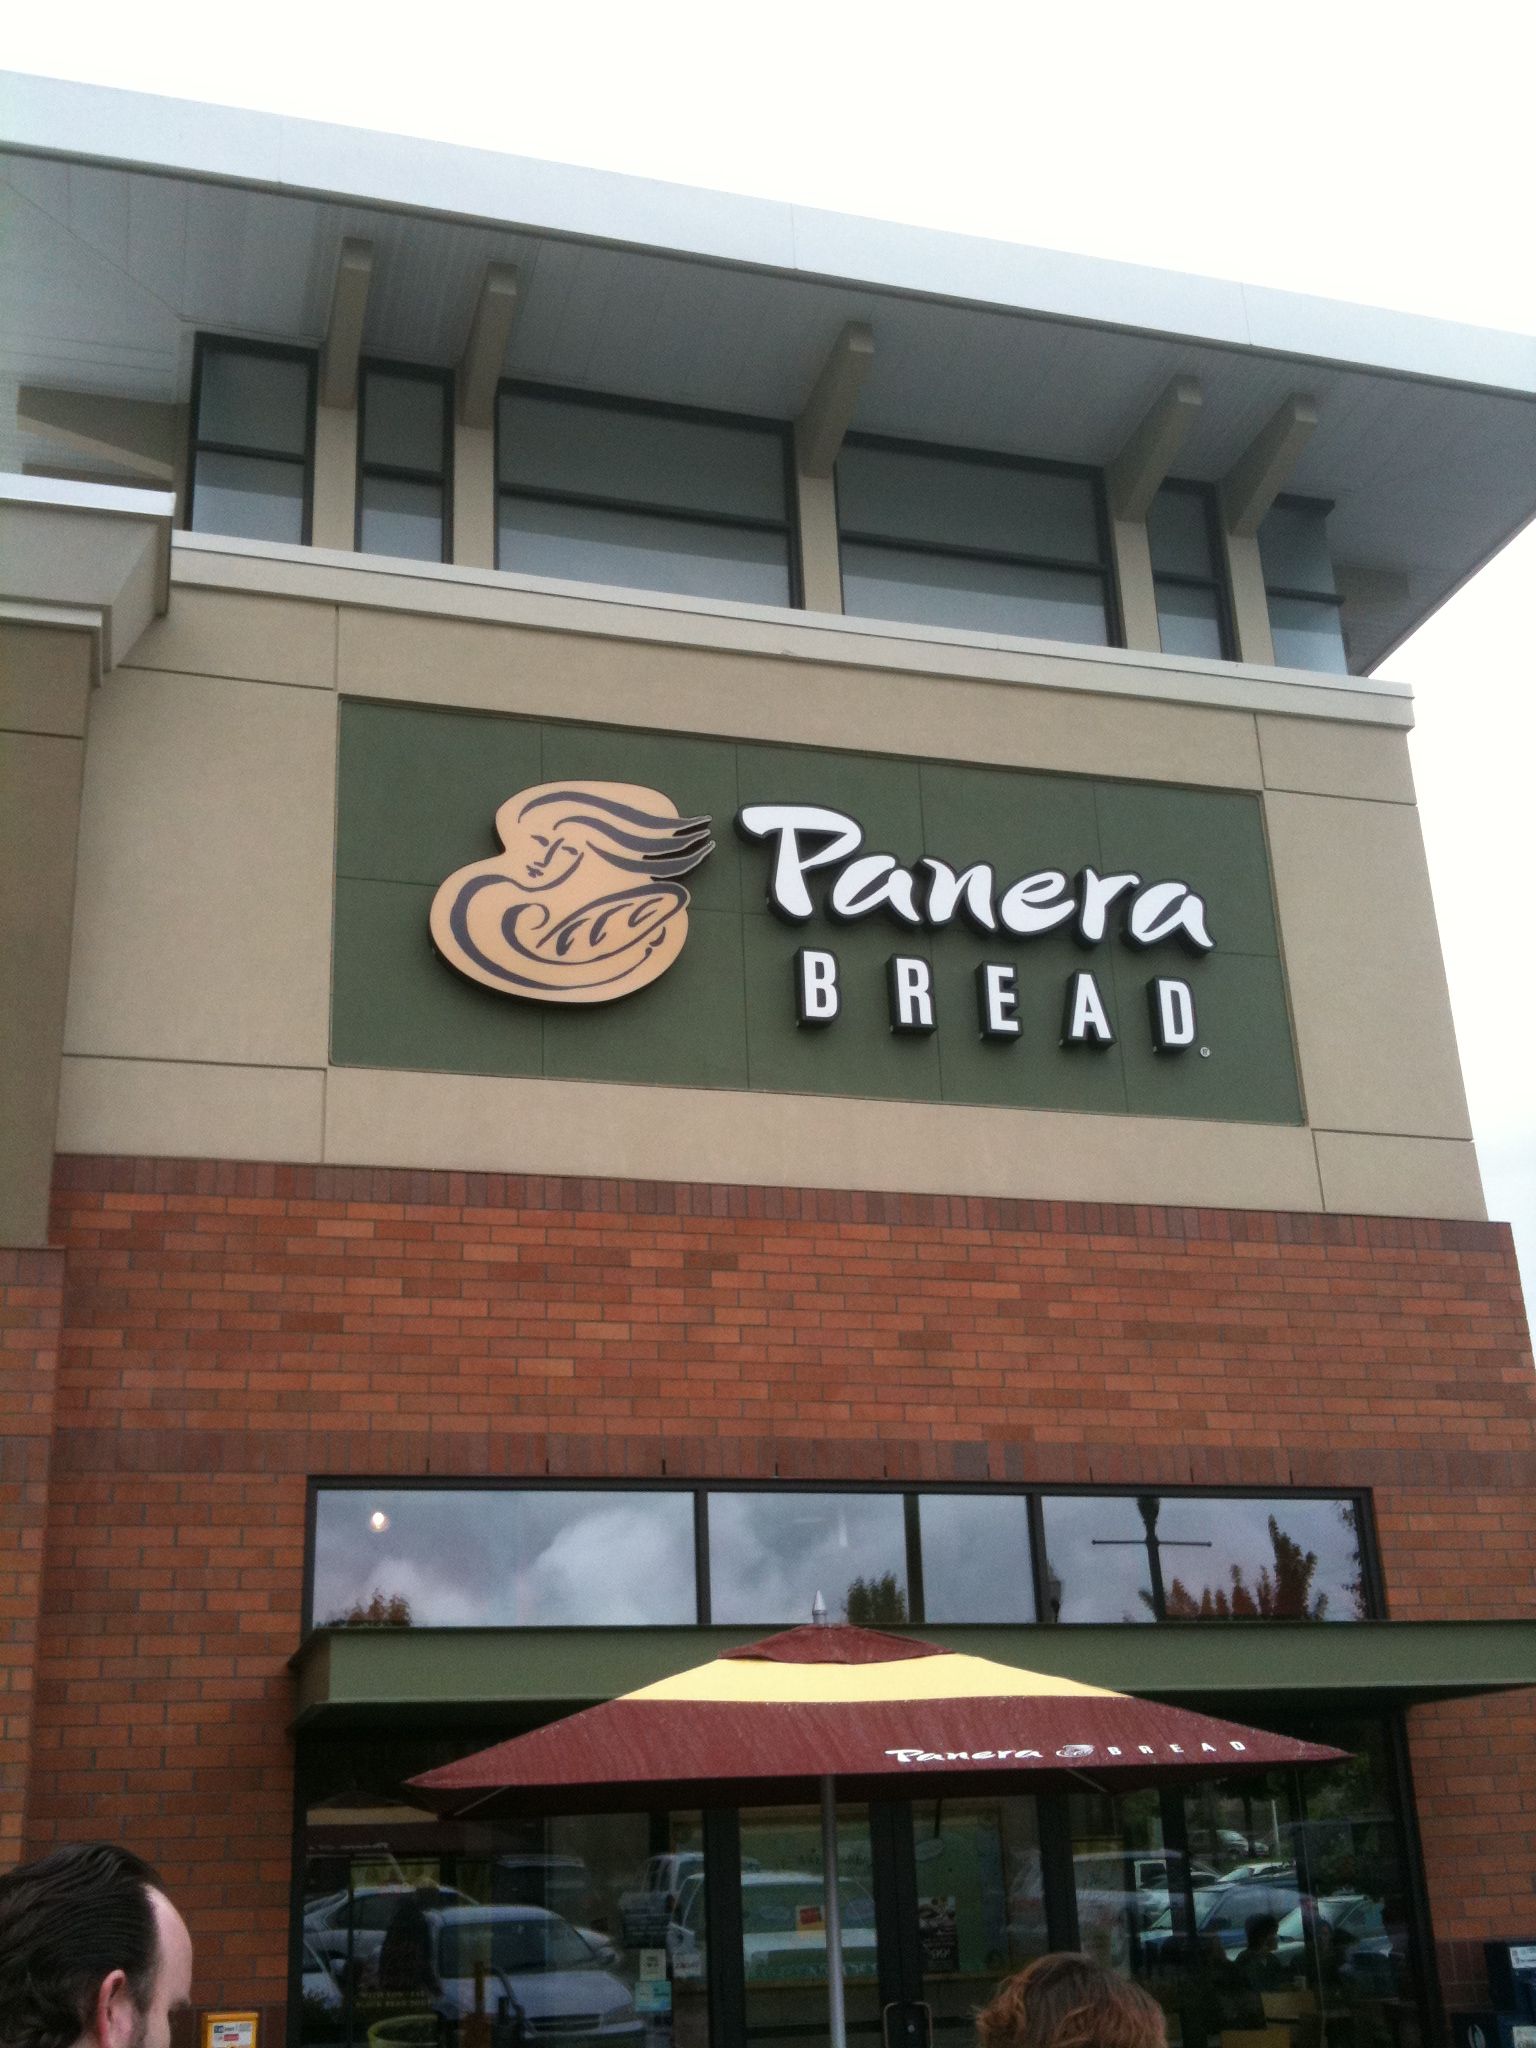 Panera Bread Overtime Pay Lawsuit | Get Paid Overtime Panera Bread